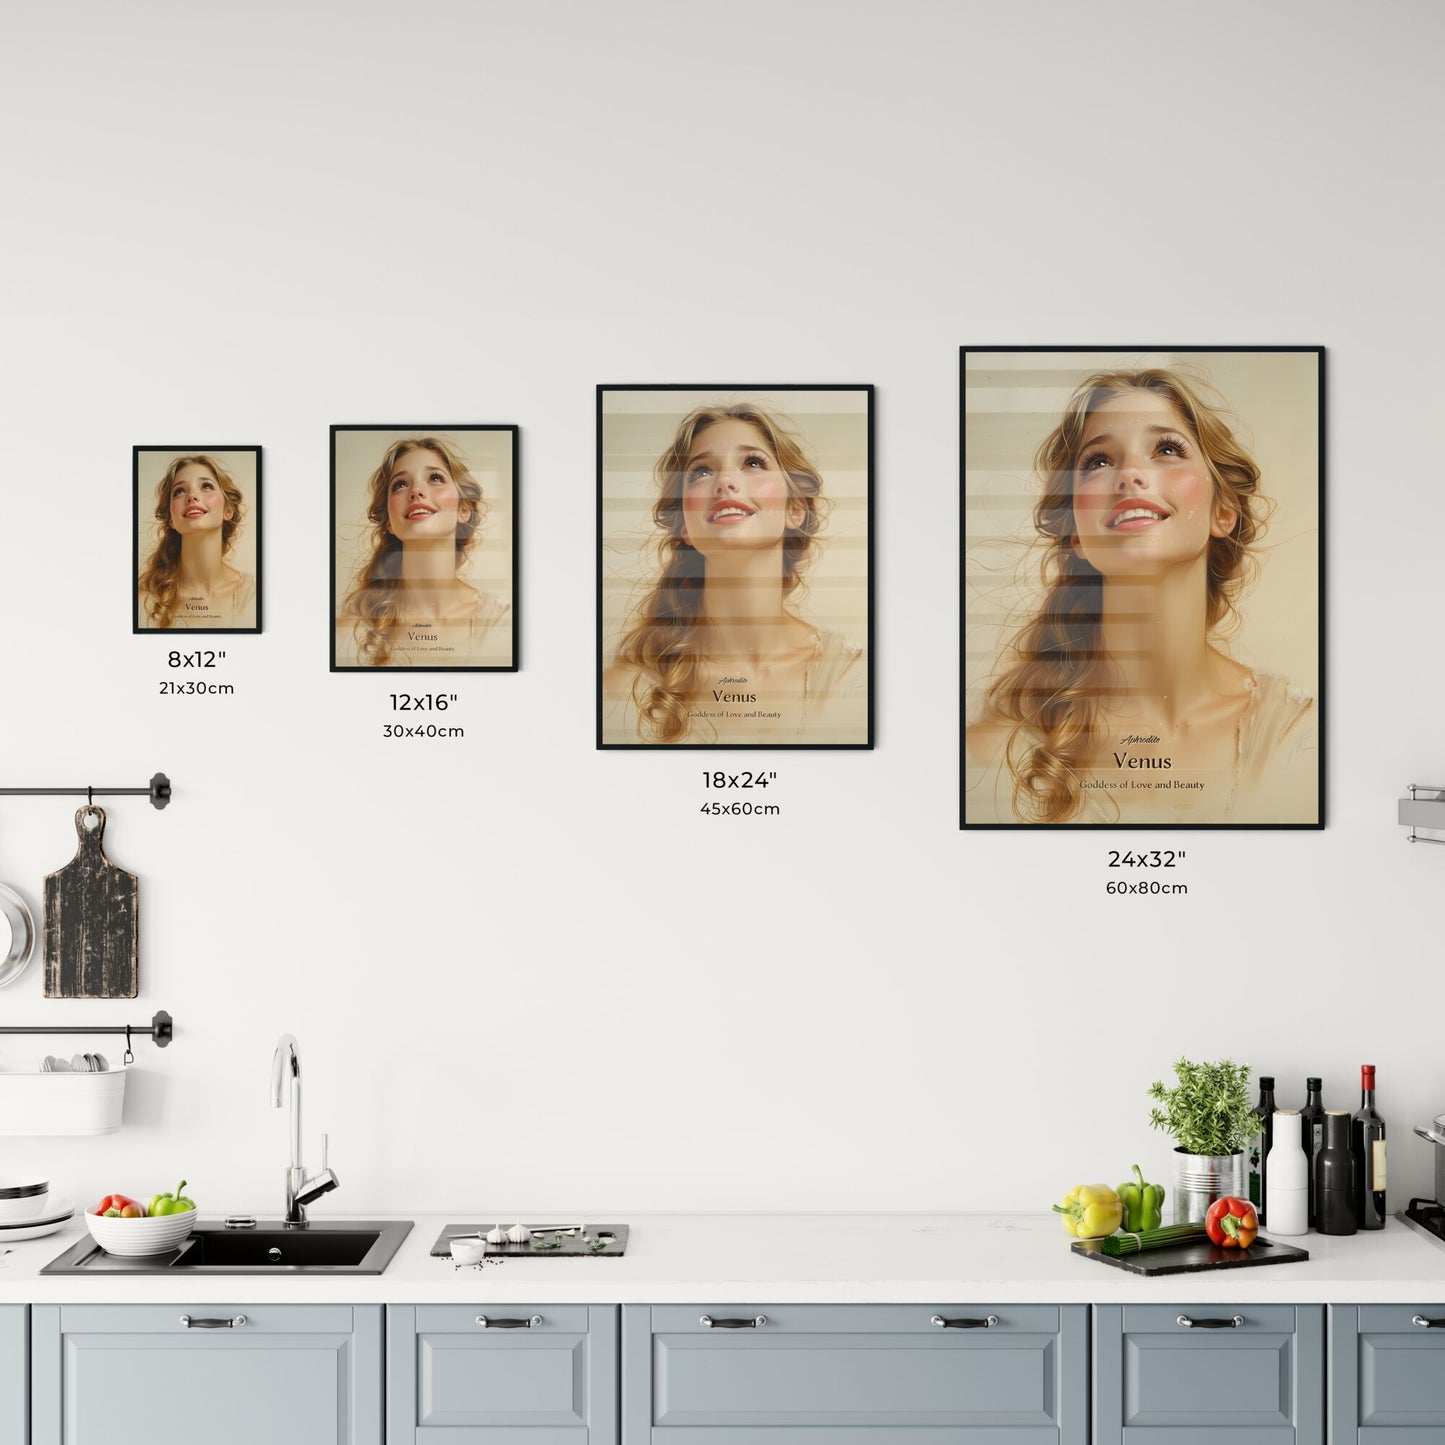 Aphrodite, Venus, Goddess of Love and Beauty, A Poster of a woman looking up to the sky Default Title